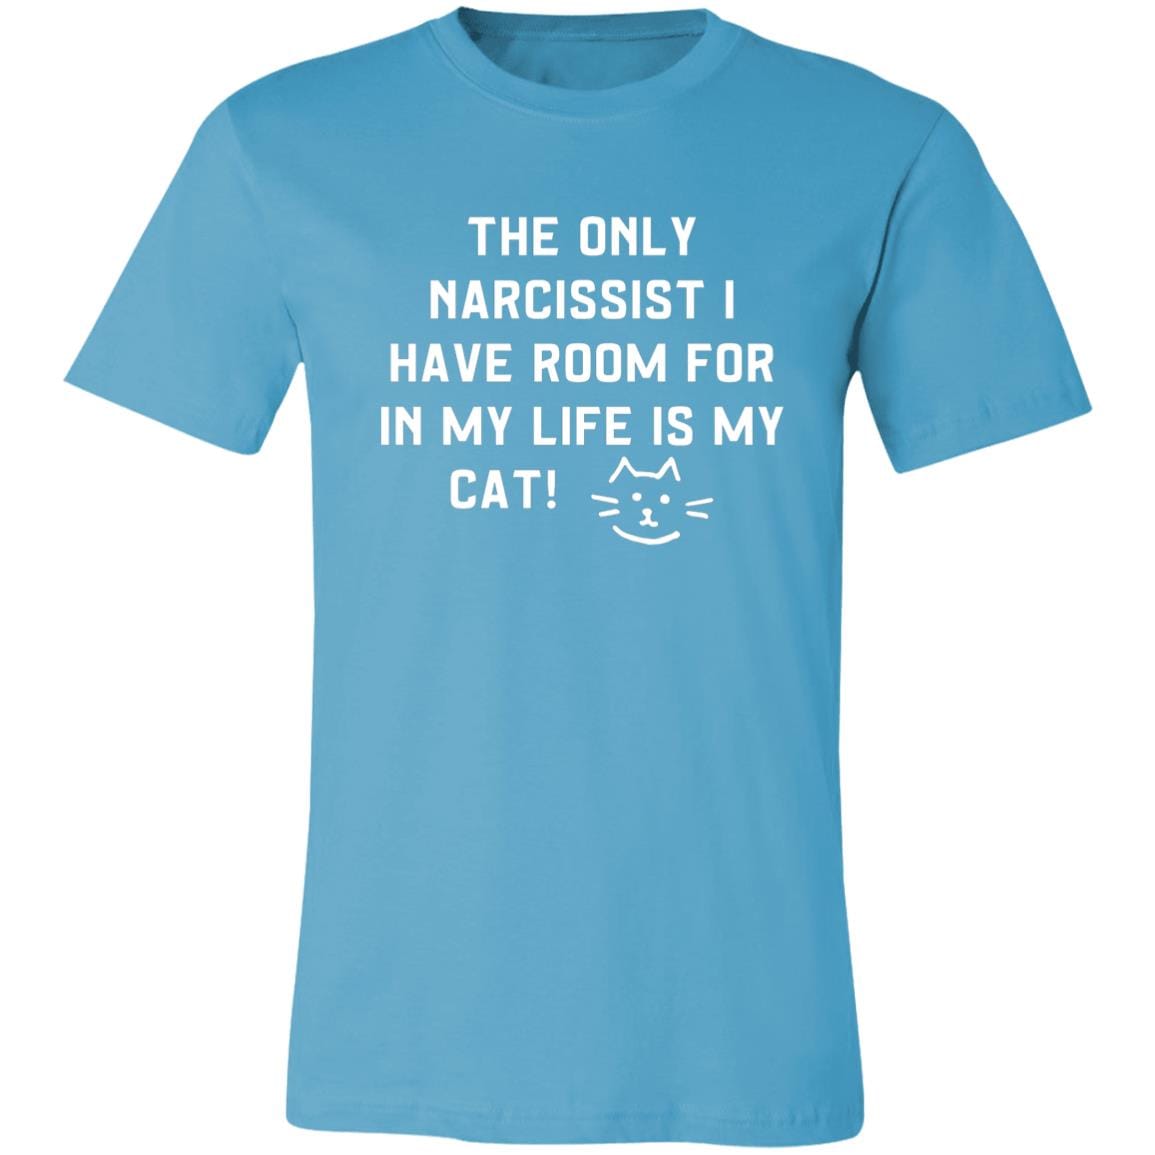 My cat is a narcissist Jersey Short-Sleeve T-Shirt